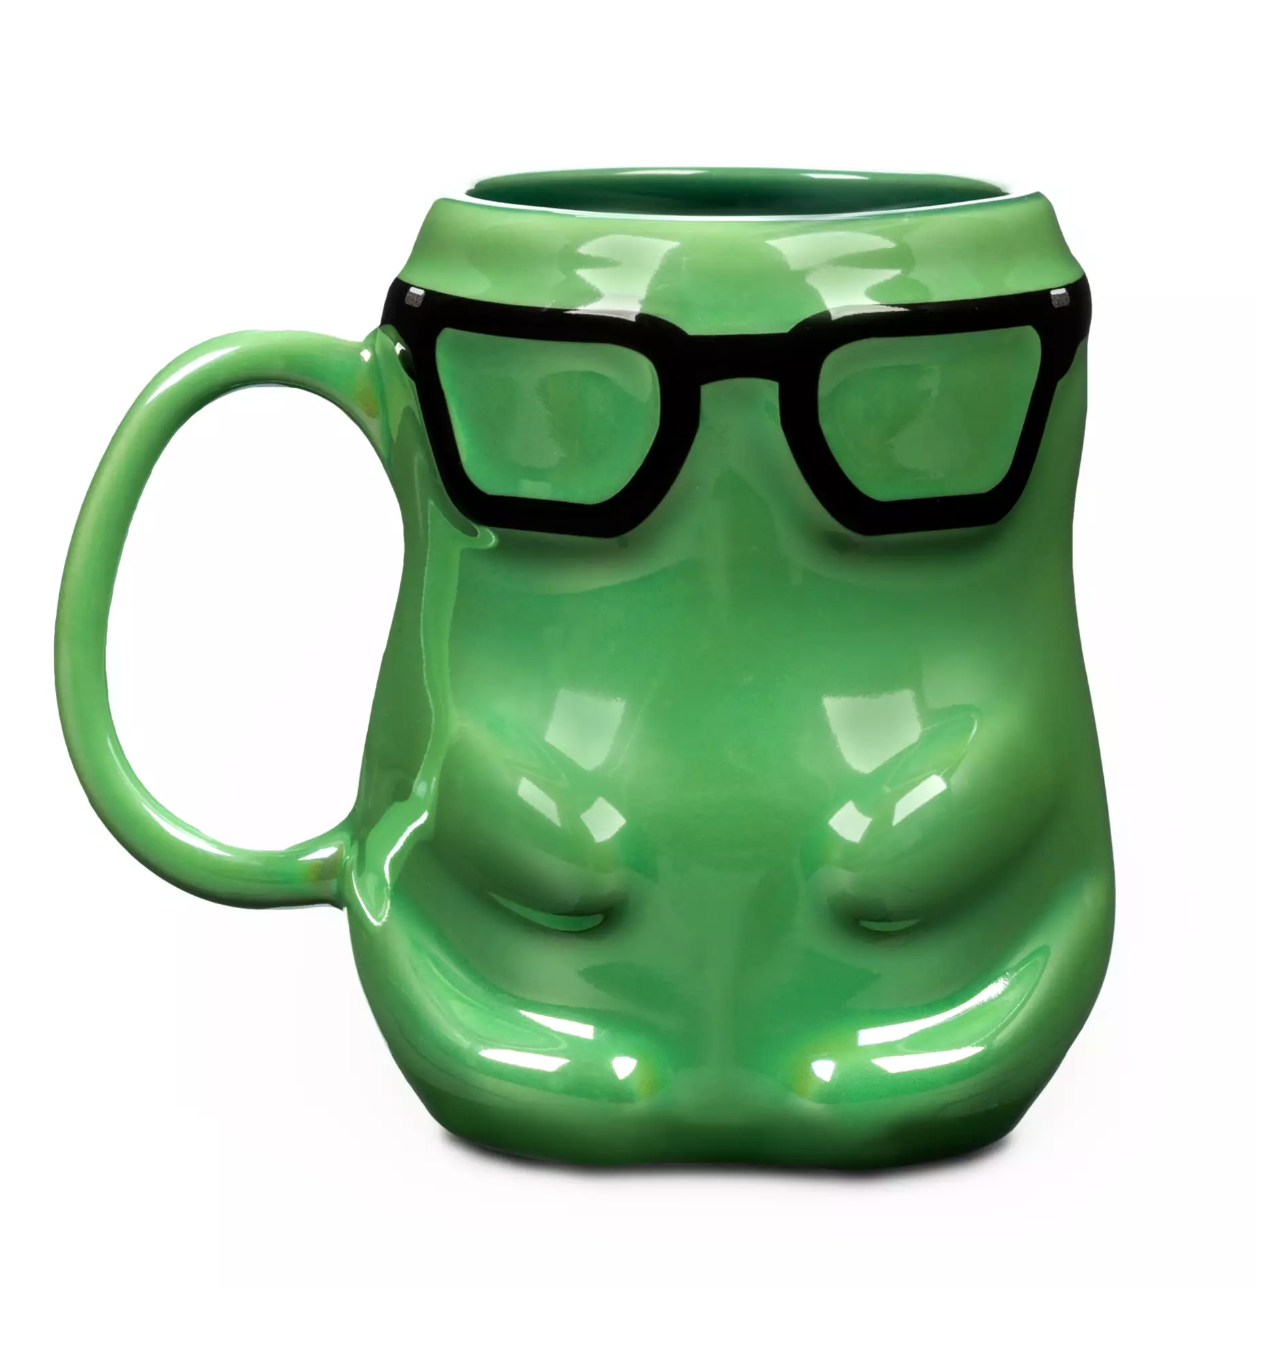 Disney The Absent-Minded Professor Flubber 25th Anniversary Mug New